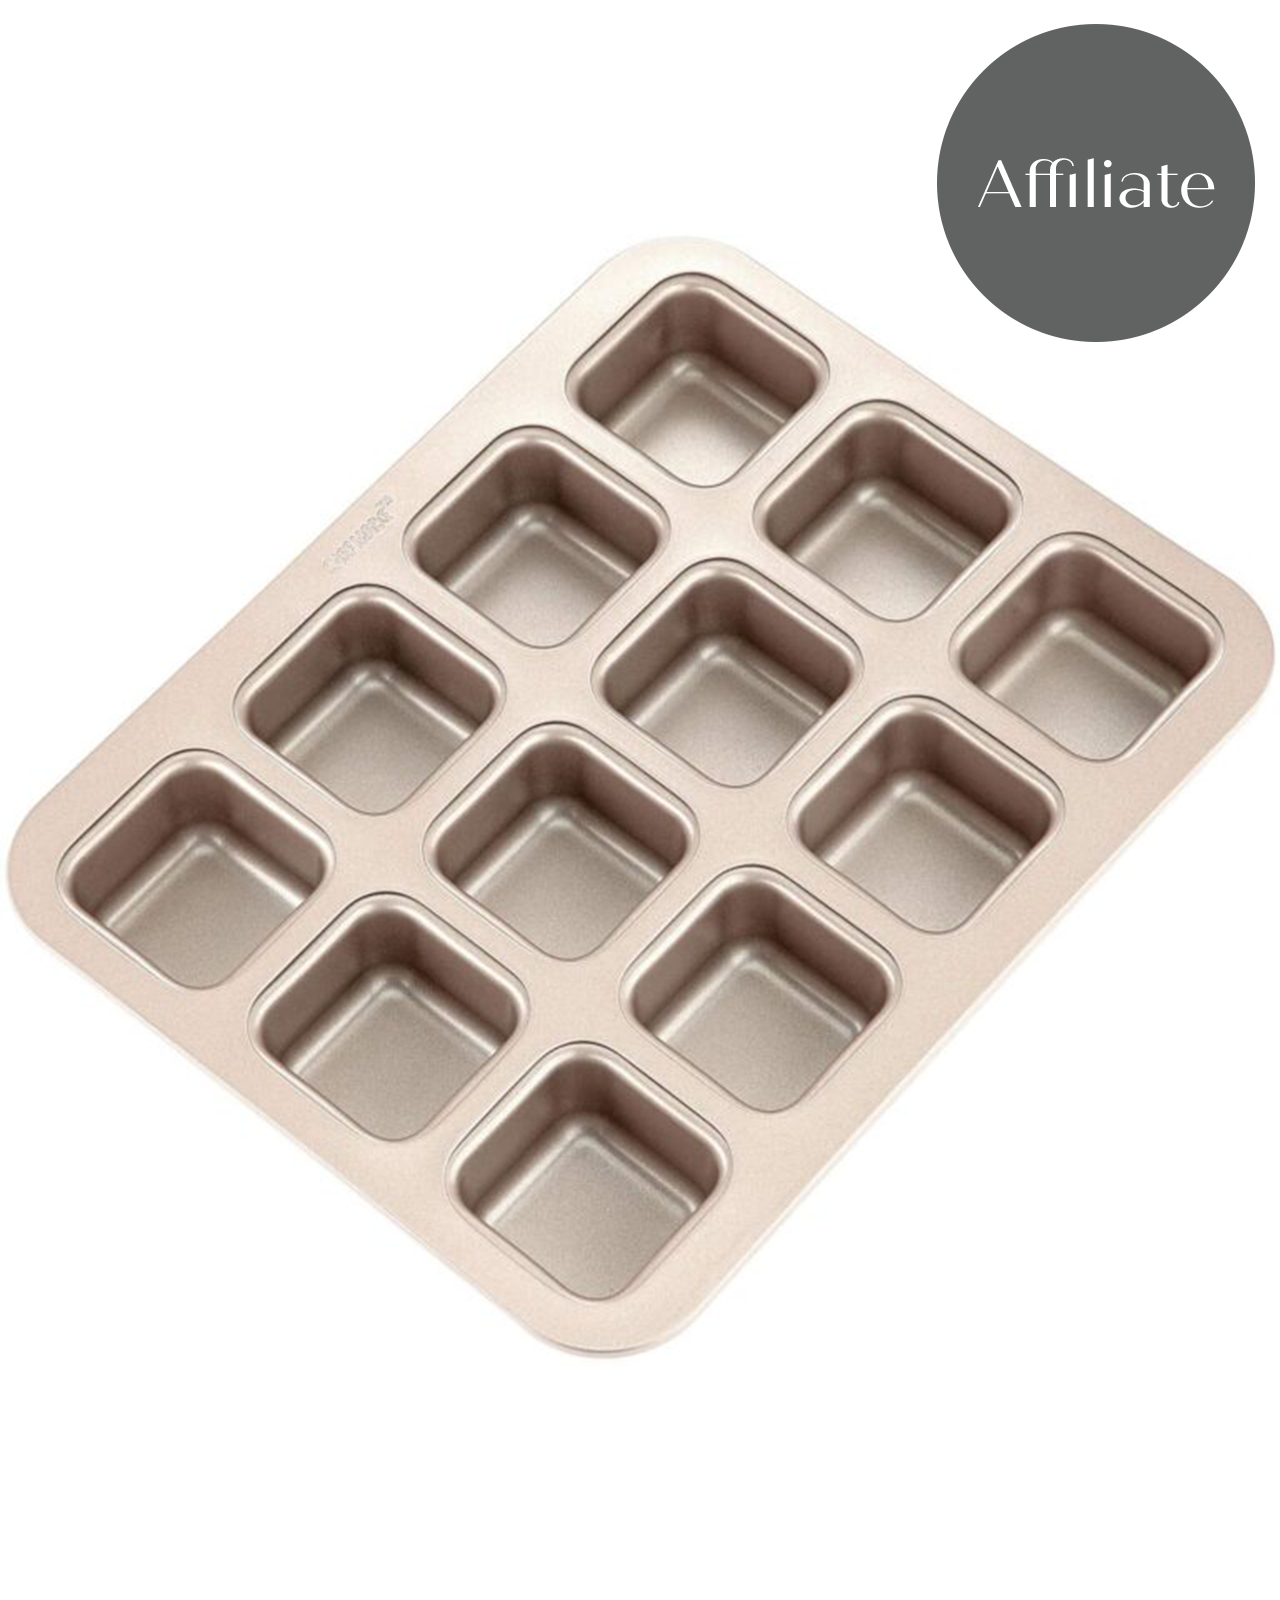 https://bluejeanchef.com/uploads/2020/05/Square-Muffin-Pan.png